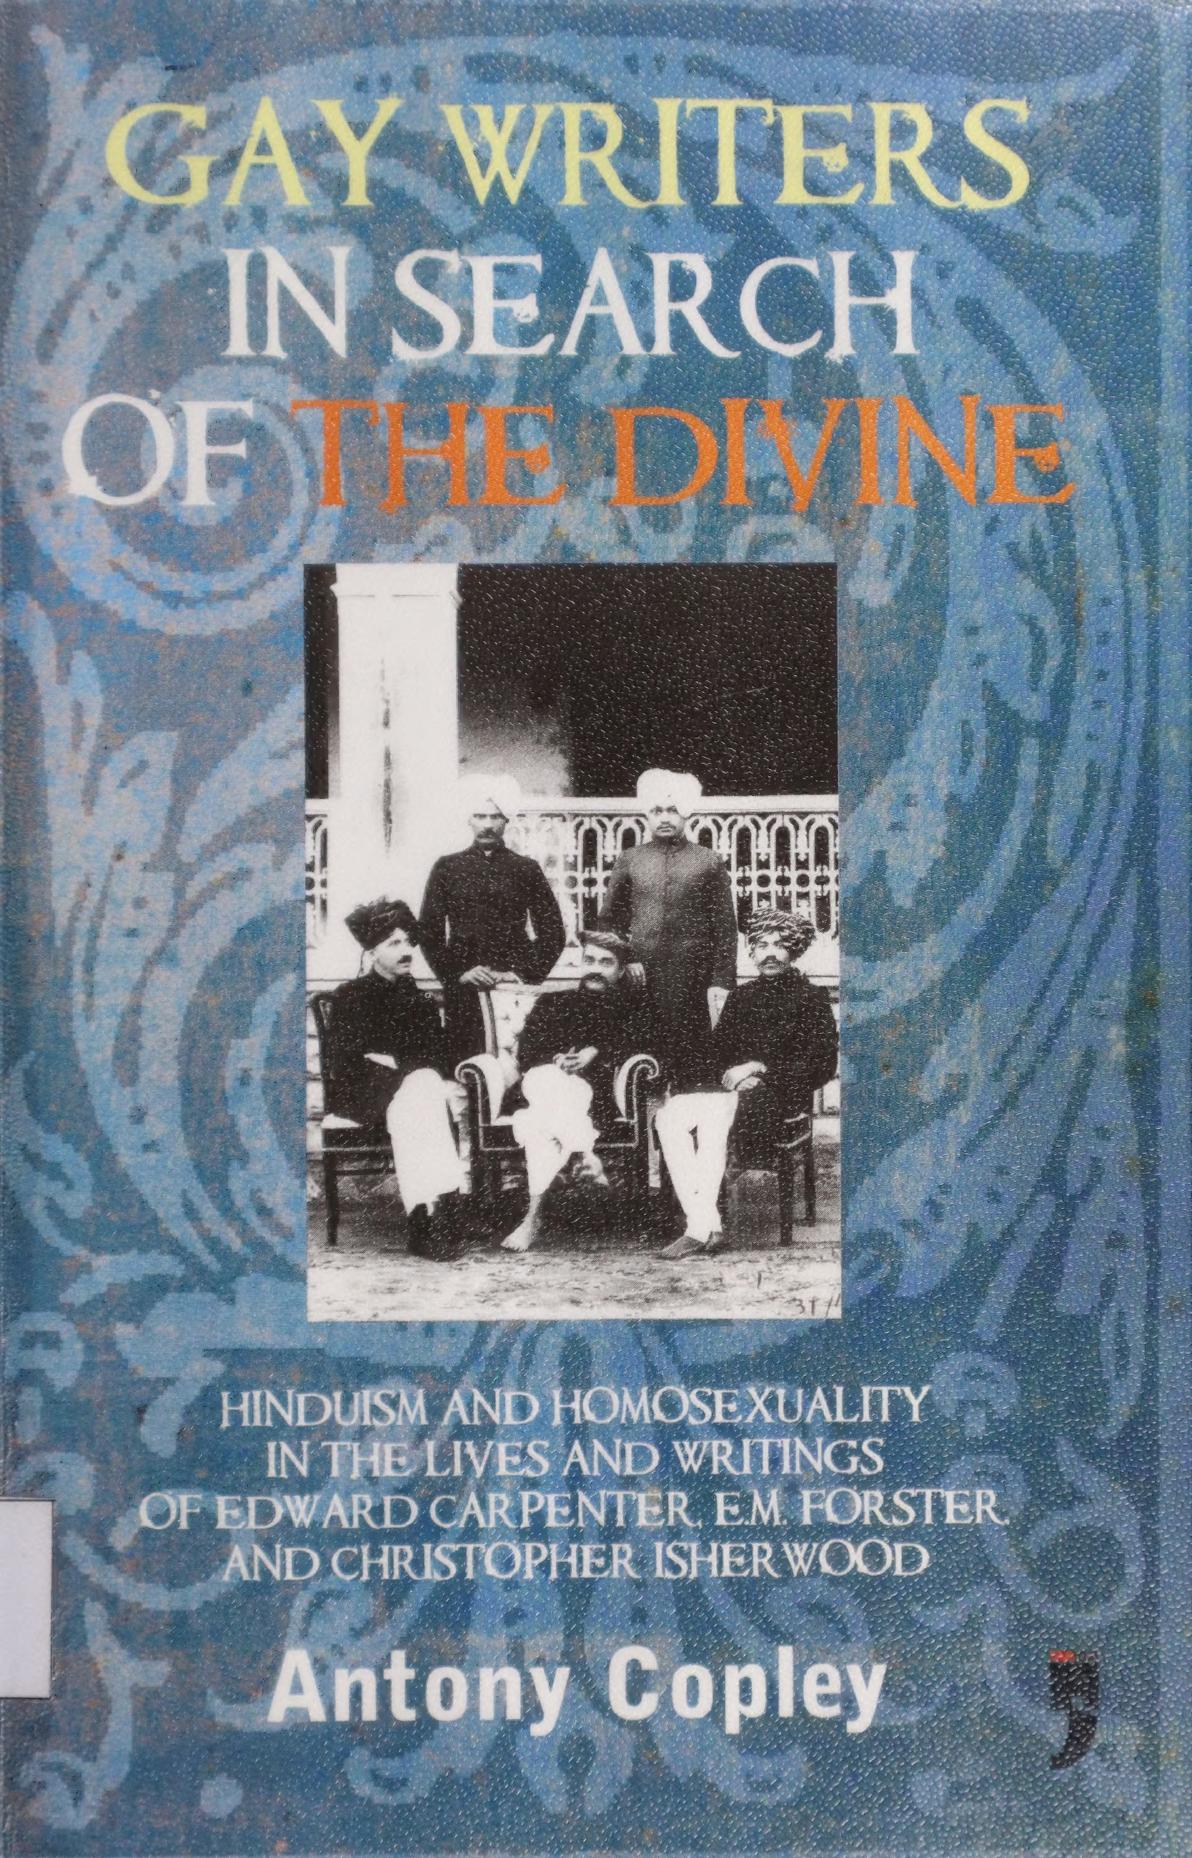 Gay Writers in Search of the Divine: Hinduism and Homosexuality in the Lives and Writings of Edward Carpenter, E.M. Forster, and Christopher Isherwood by Antony Copley